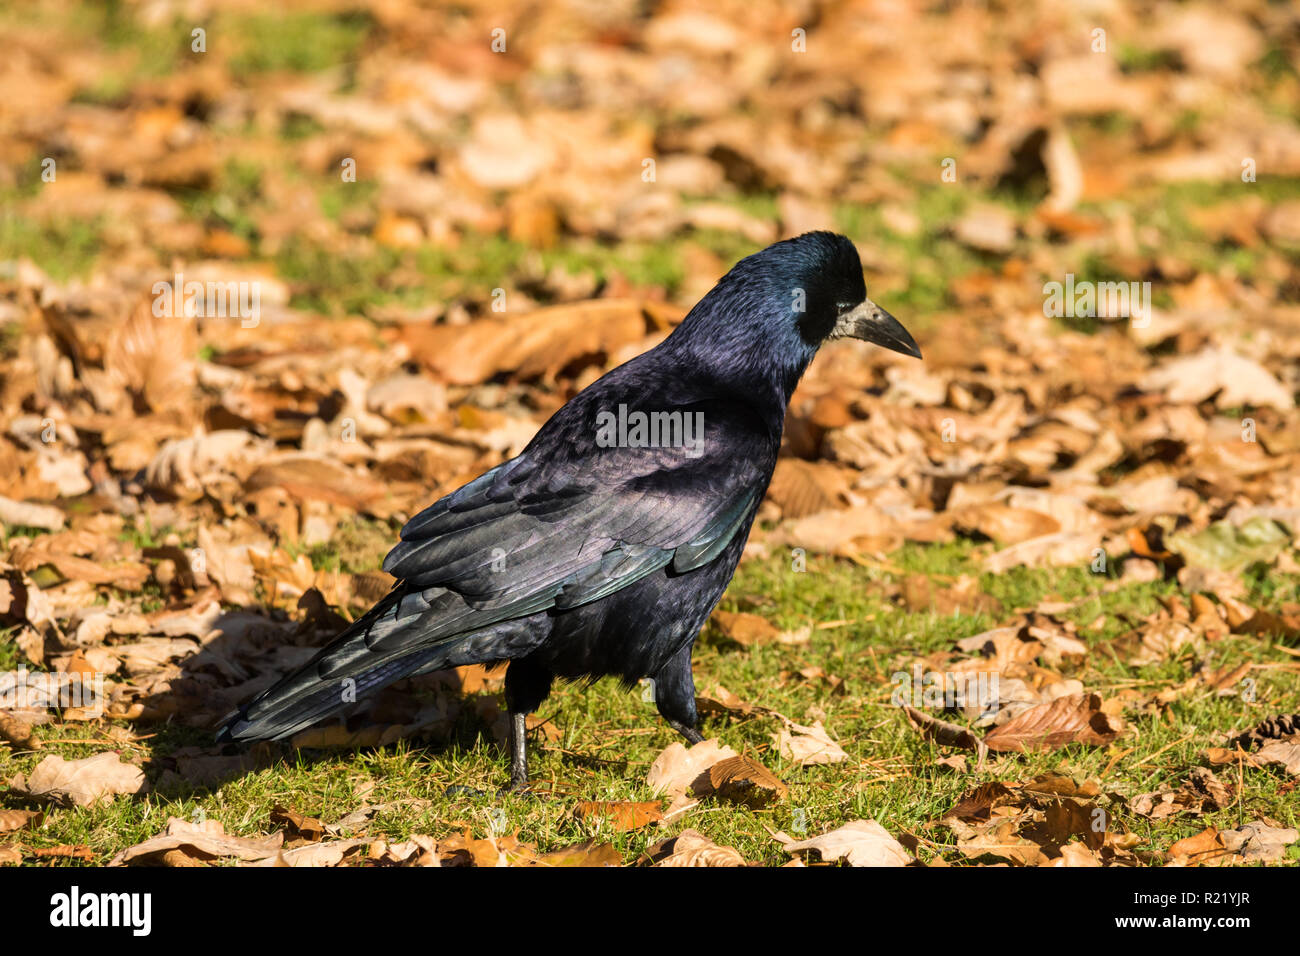 Rook (Corvus frugilegus) standing on the grass surrounded by fallen autumn leaves Stock Photo